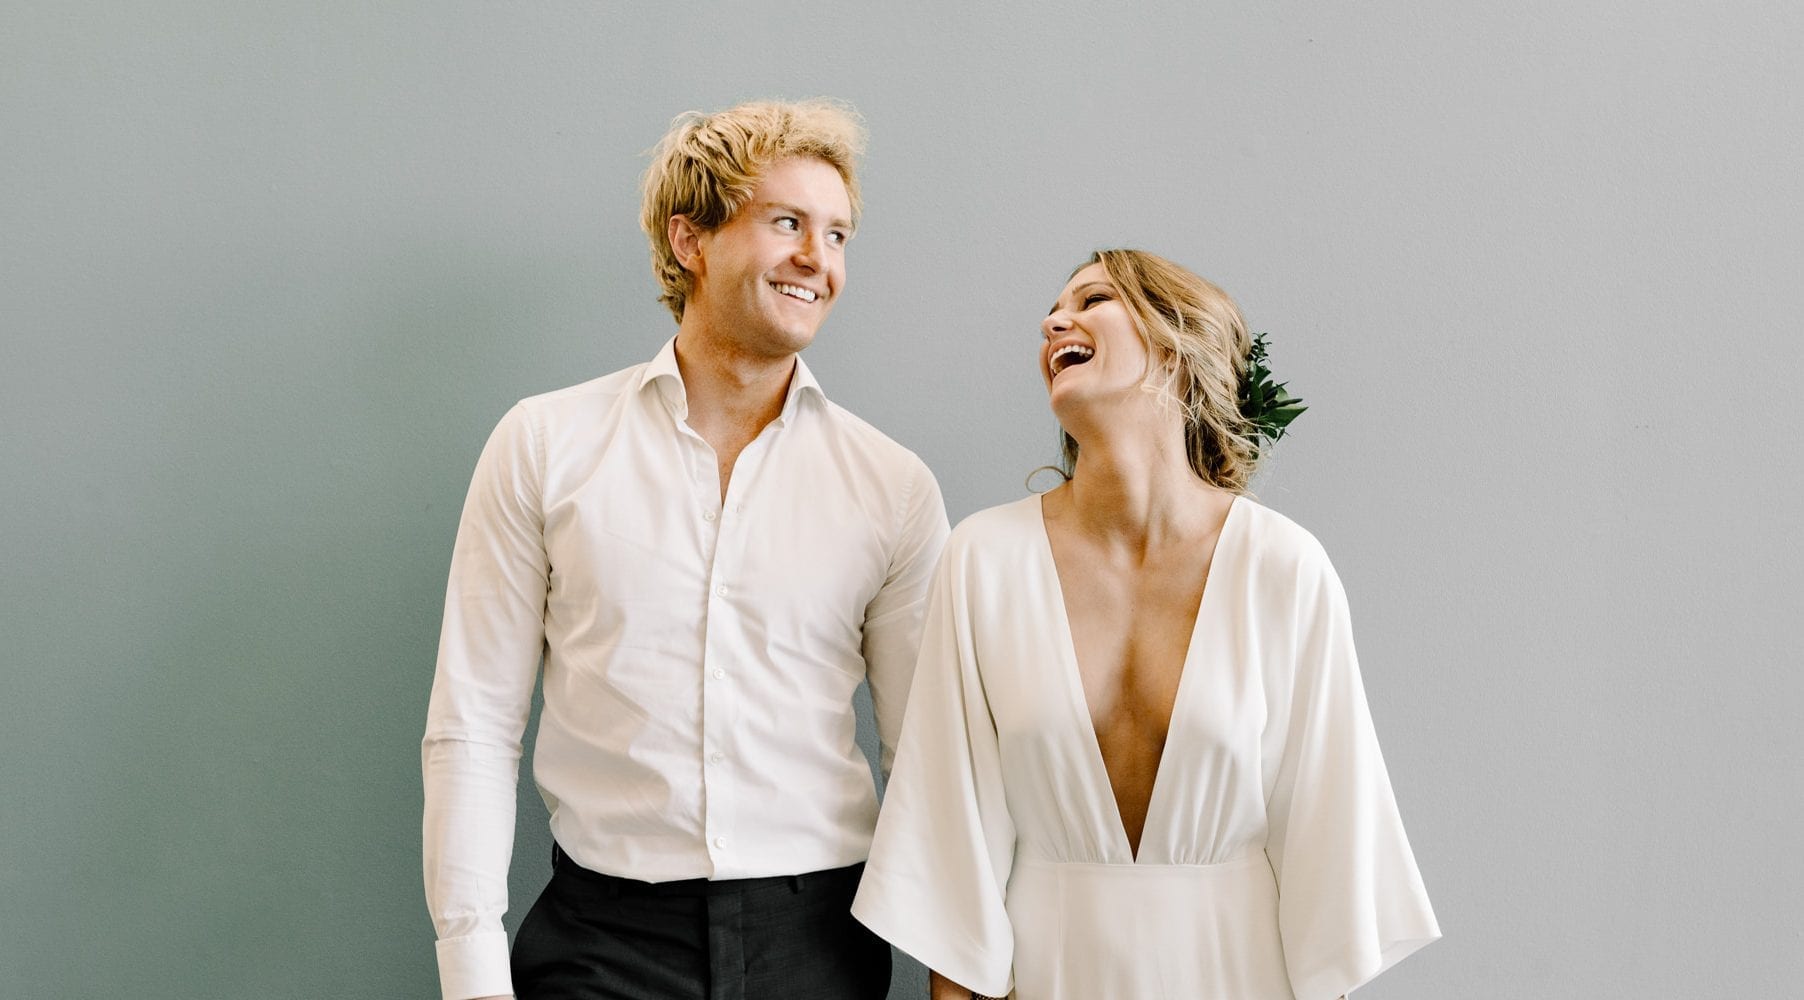 Happy and laughing wedding couple with style